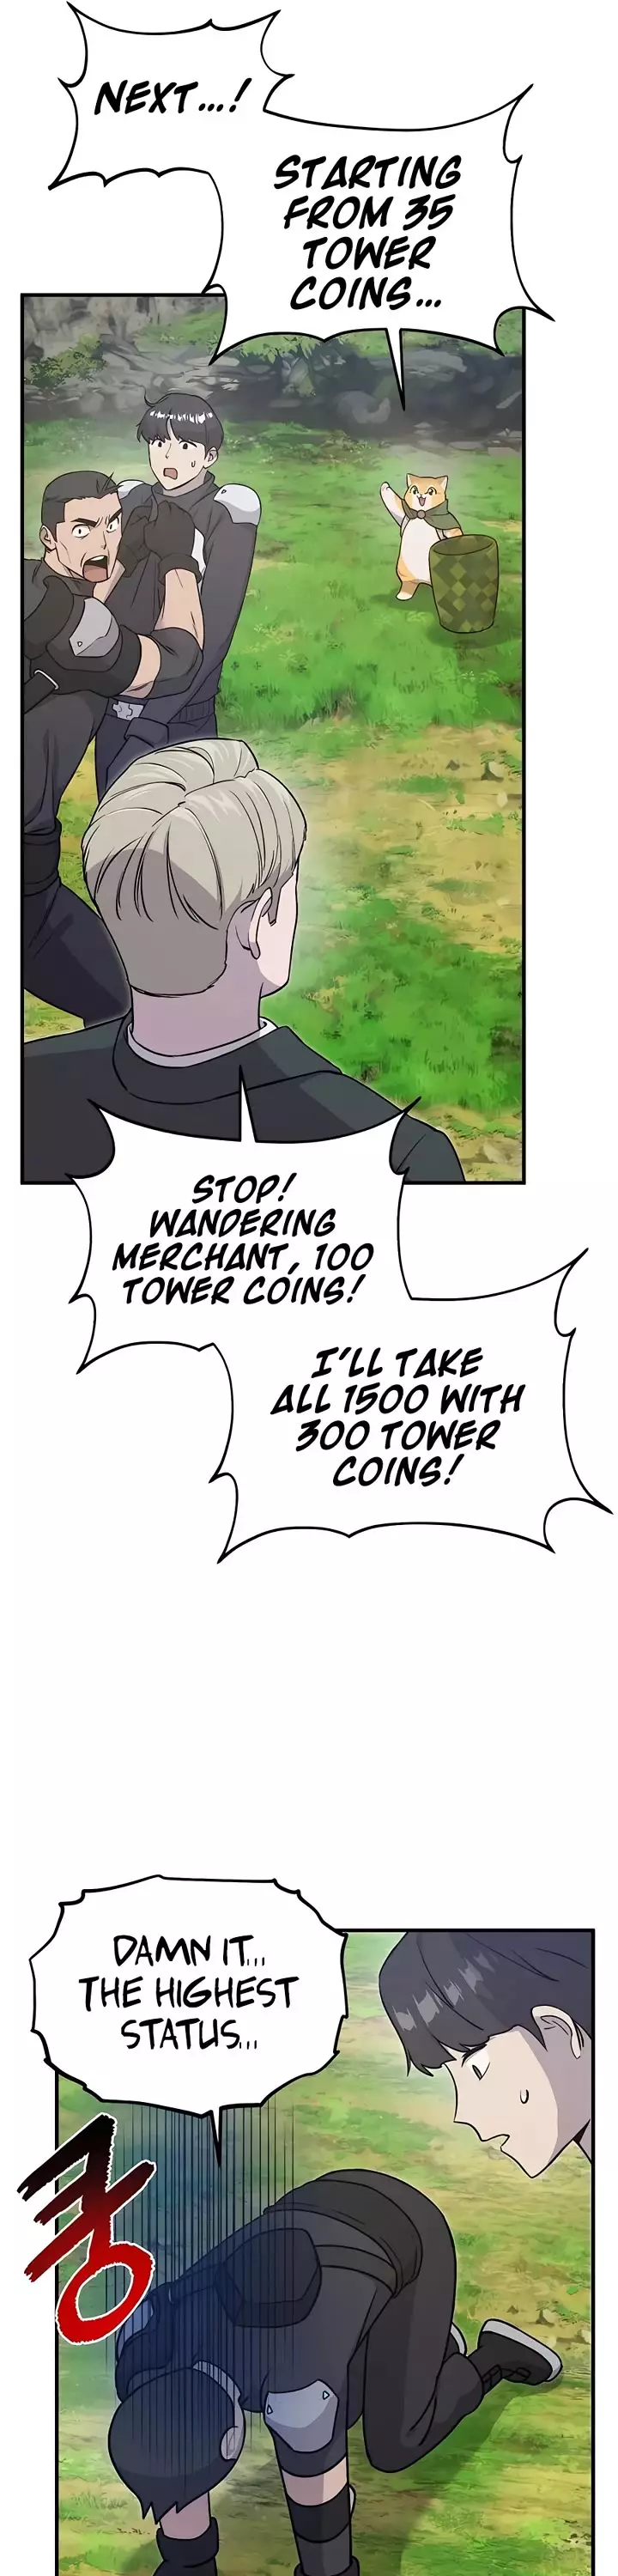 Solo Farming In The Tower - 18 page 4-f7fceacb